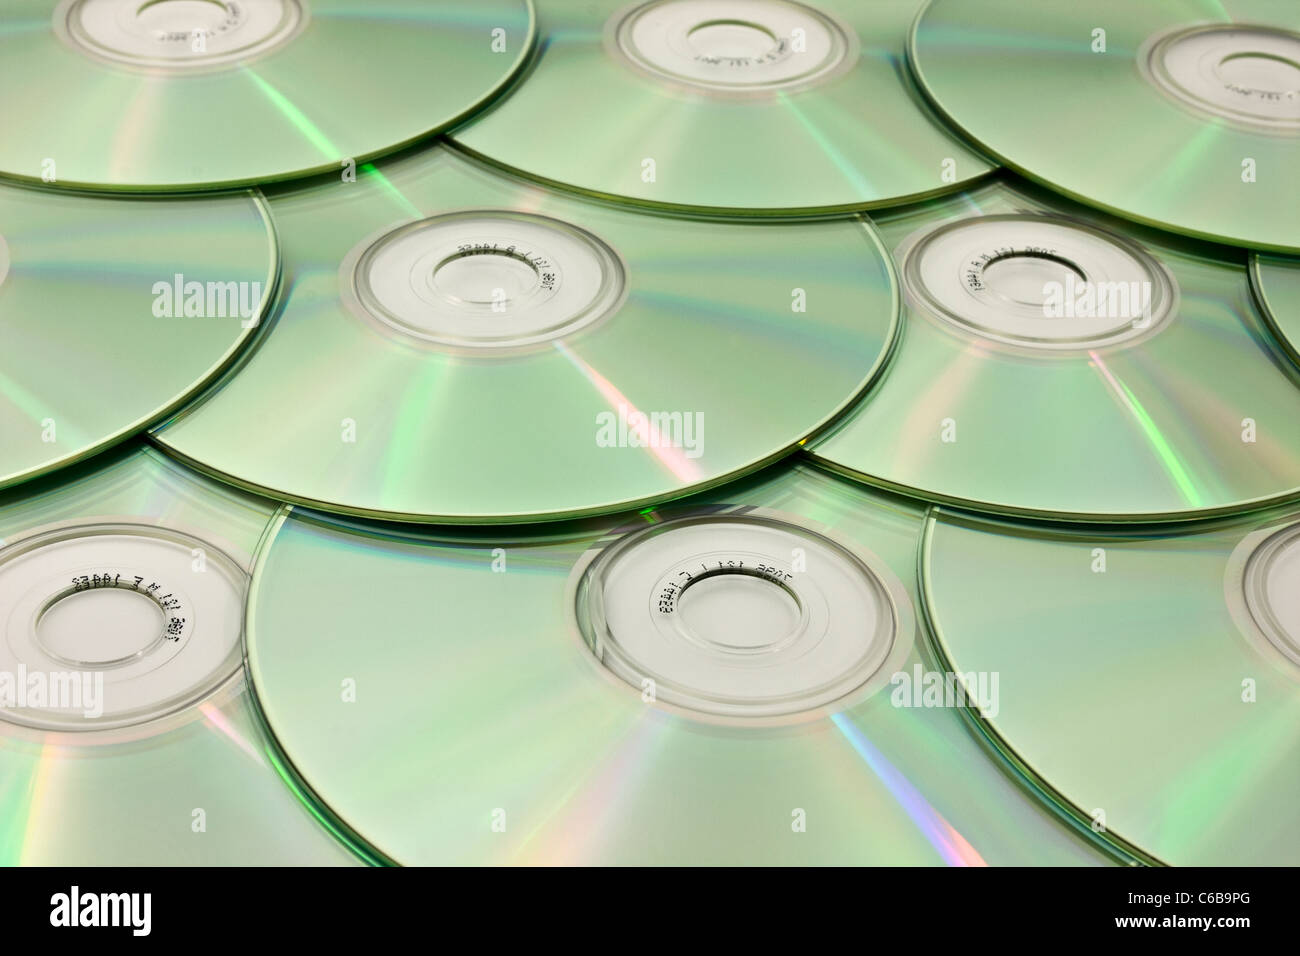 Optical discs laid out in an attractive pattern Stock Photo